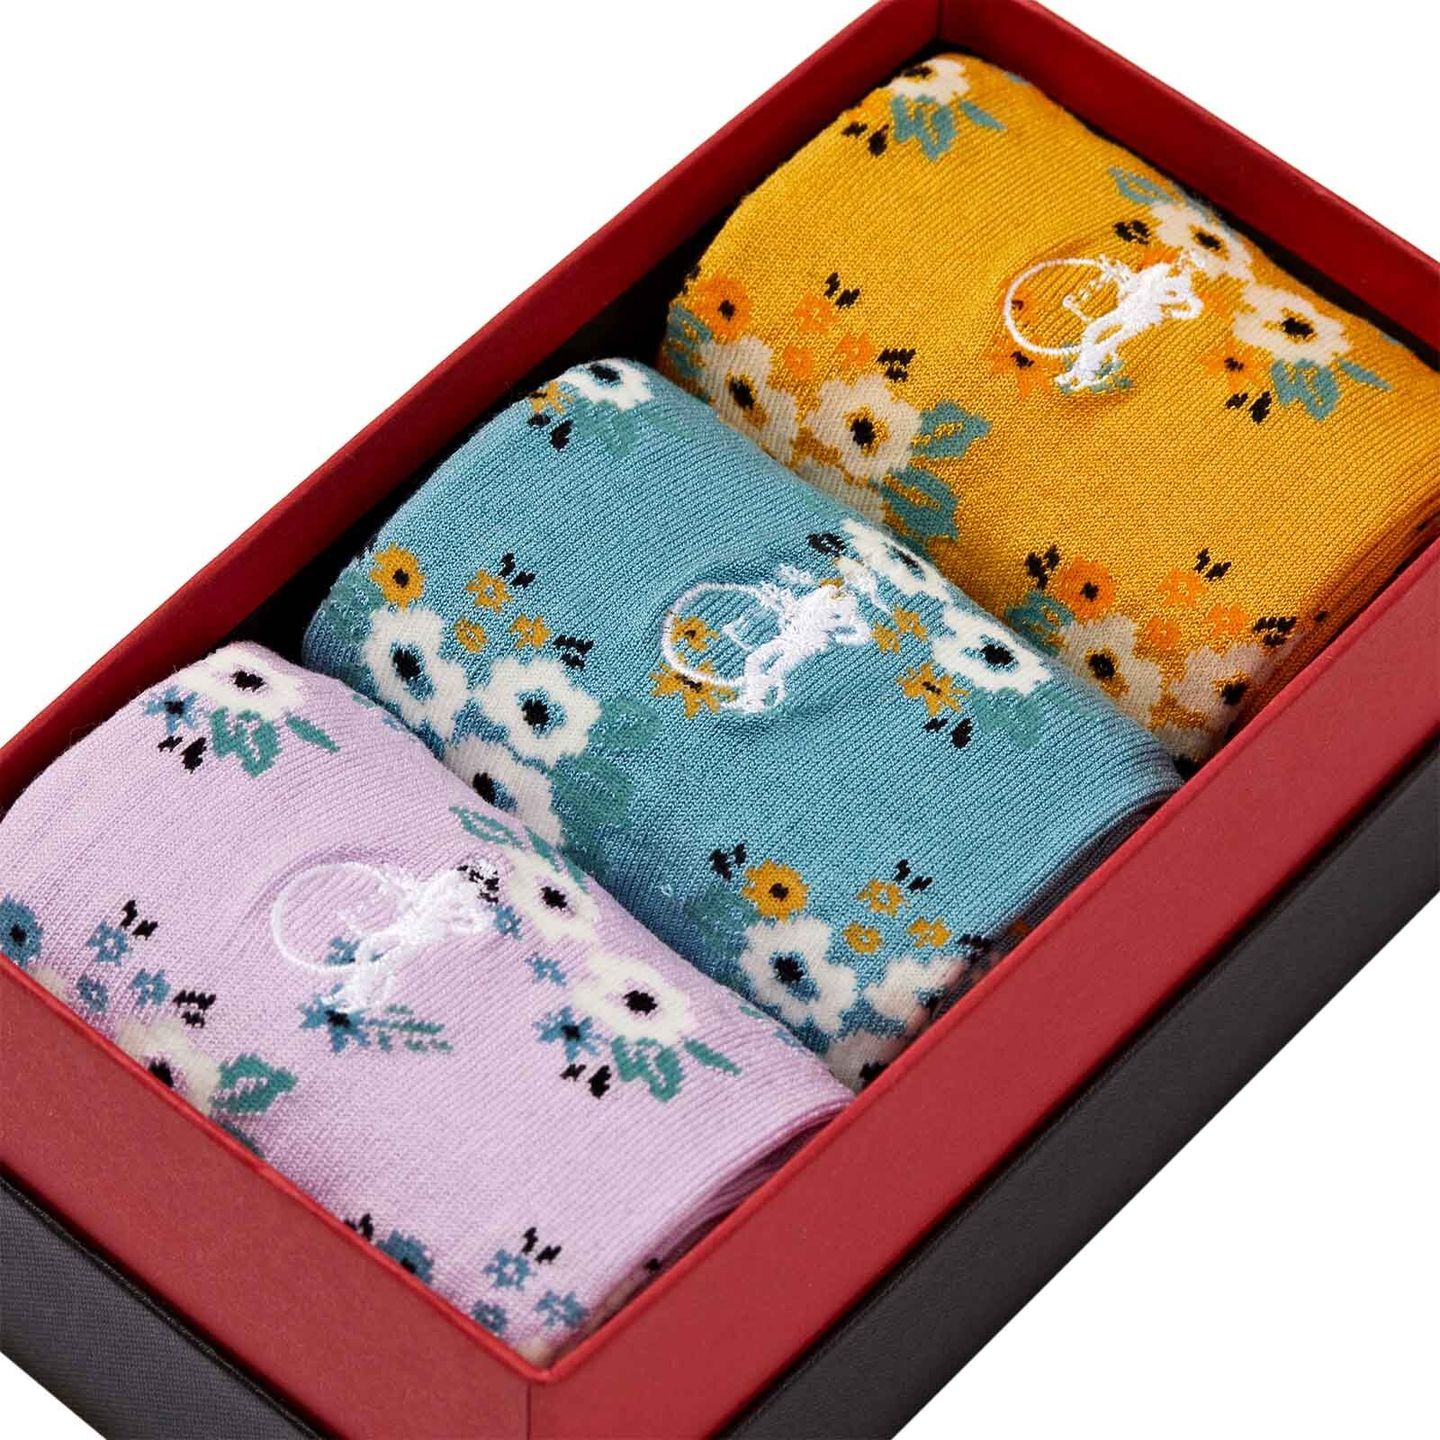 Close up of 3 pairs of floral designed socks in a presentation box